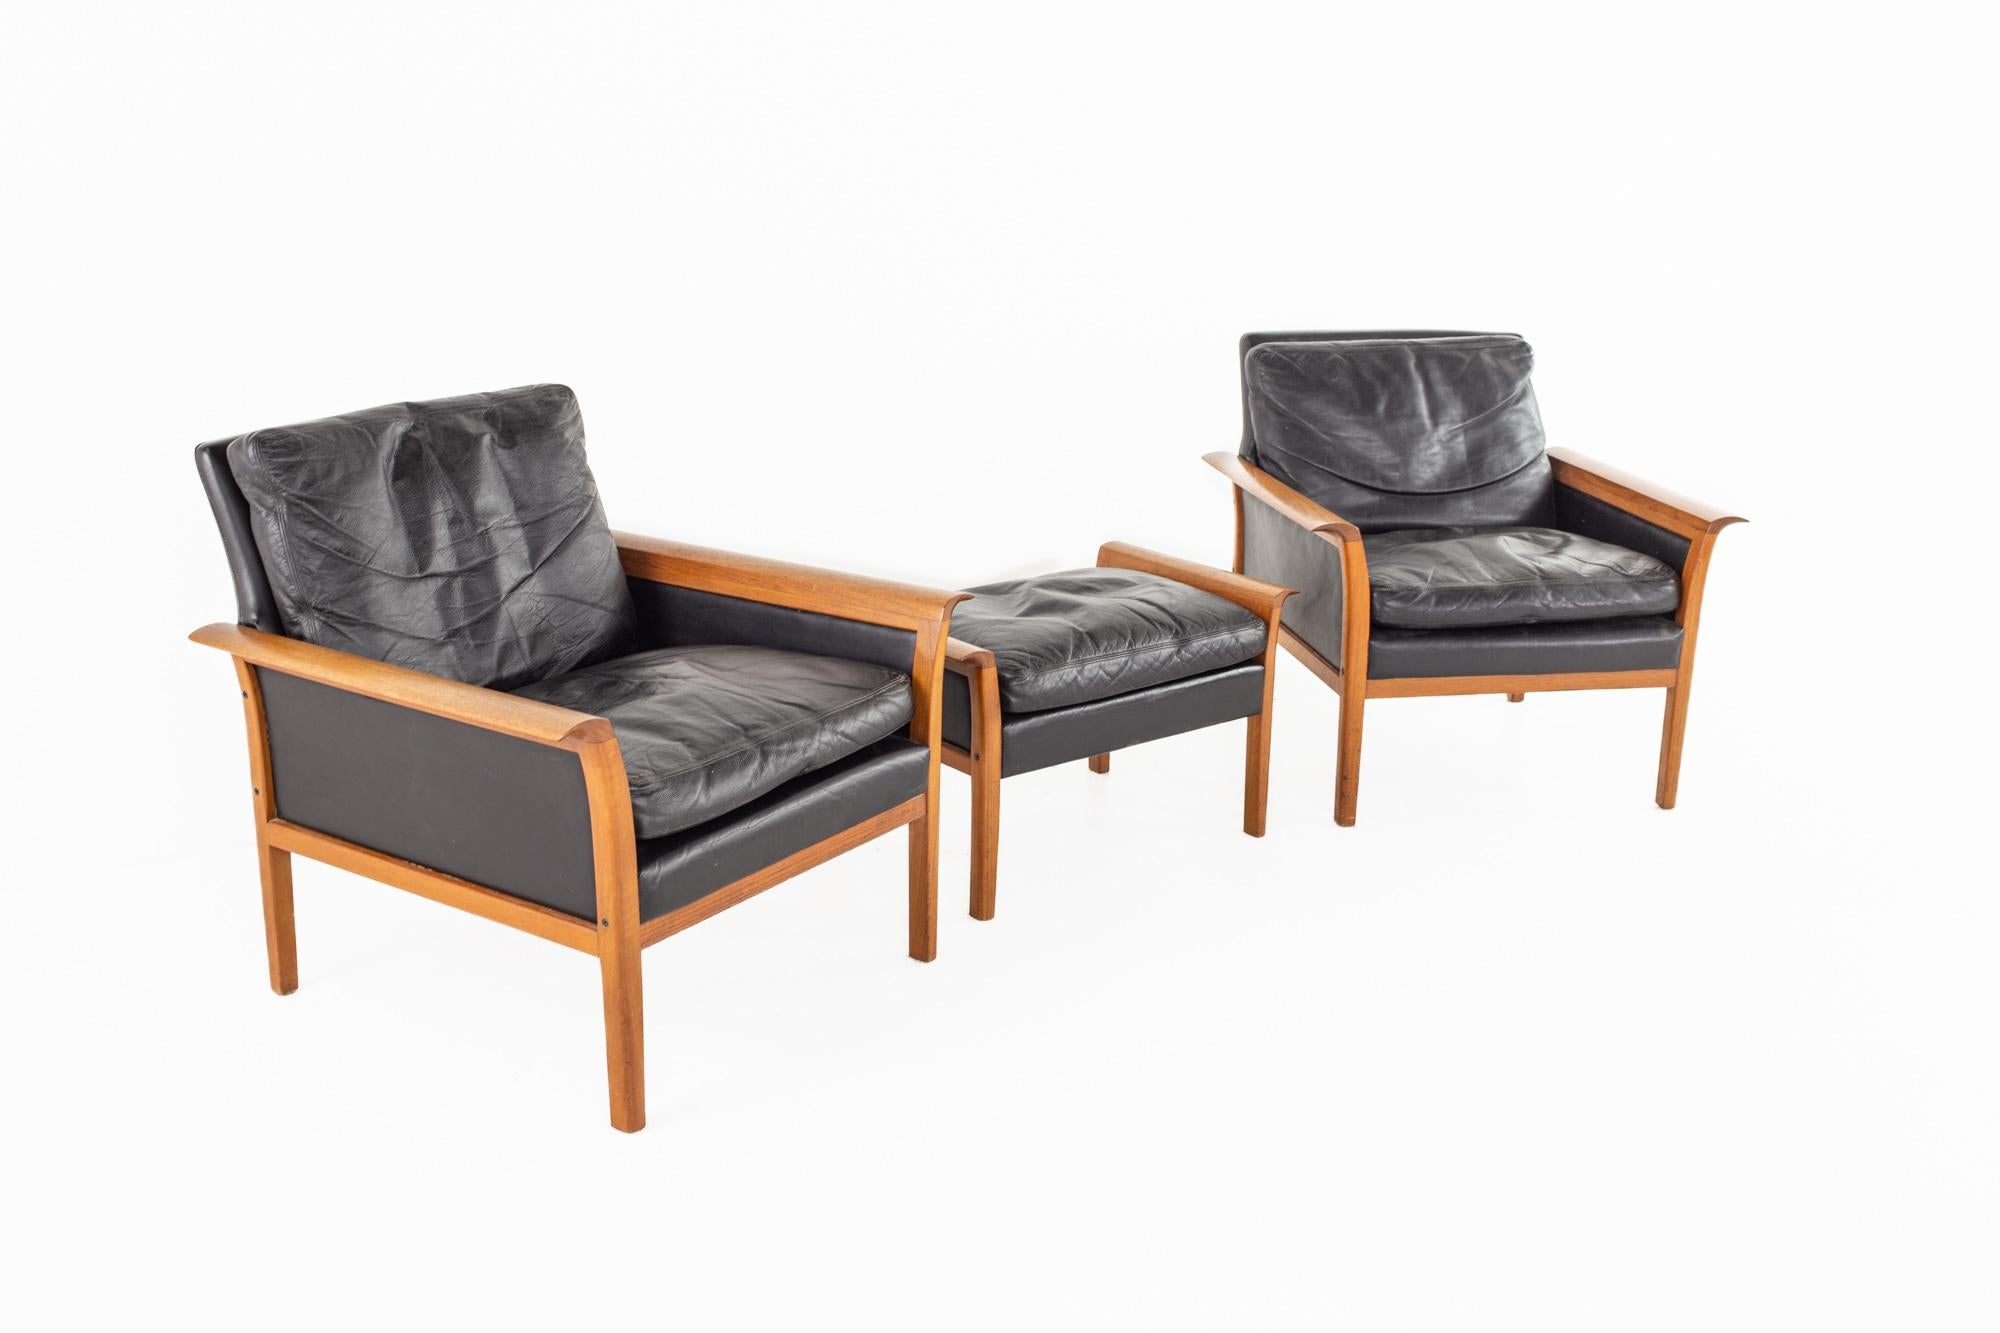 Knut Sæter for Vatne Mobler Mid Century Teak and Black Leather Chair and Ottoman Set

Each chair measures: 30 wide x 26 deep x 29 inches high
The ottoman measures: 27 wide x 16 deep x 17 inches high

All pieces of furniture can be had in what